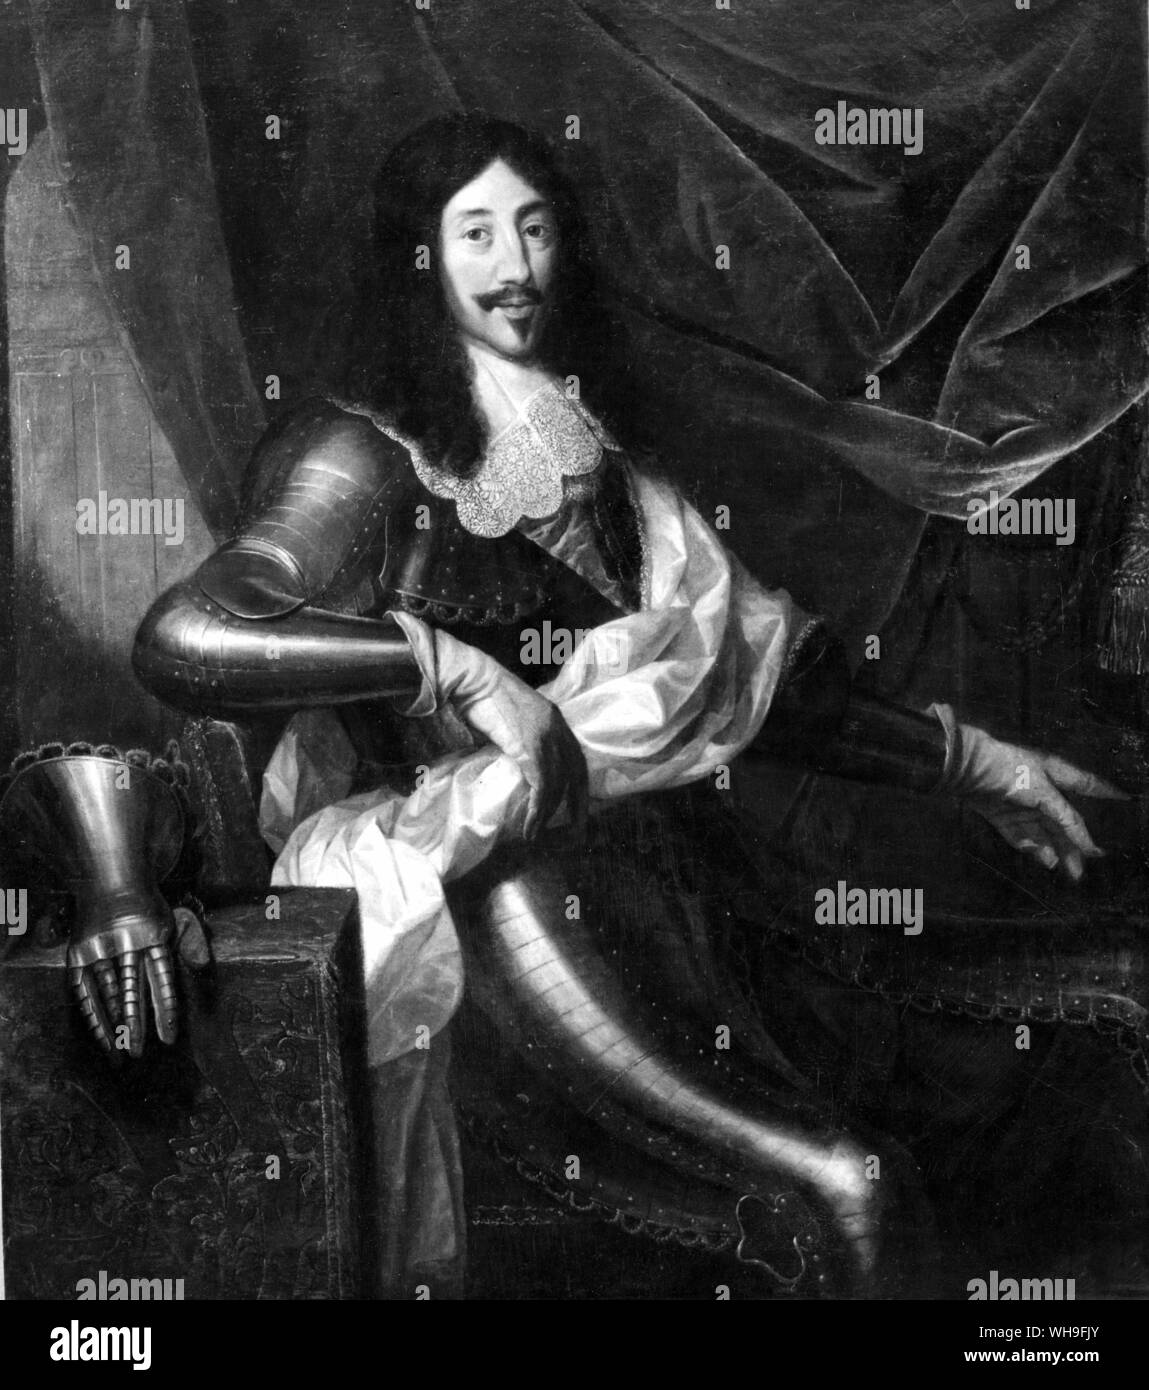 Louis XIII (1601-1643), King of France from 1610 (in succession to his father Henry IV). Stock Photo